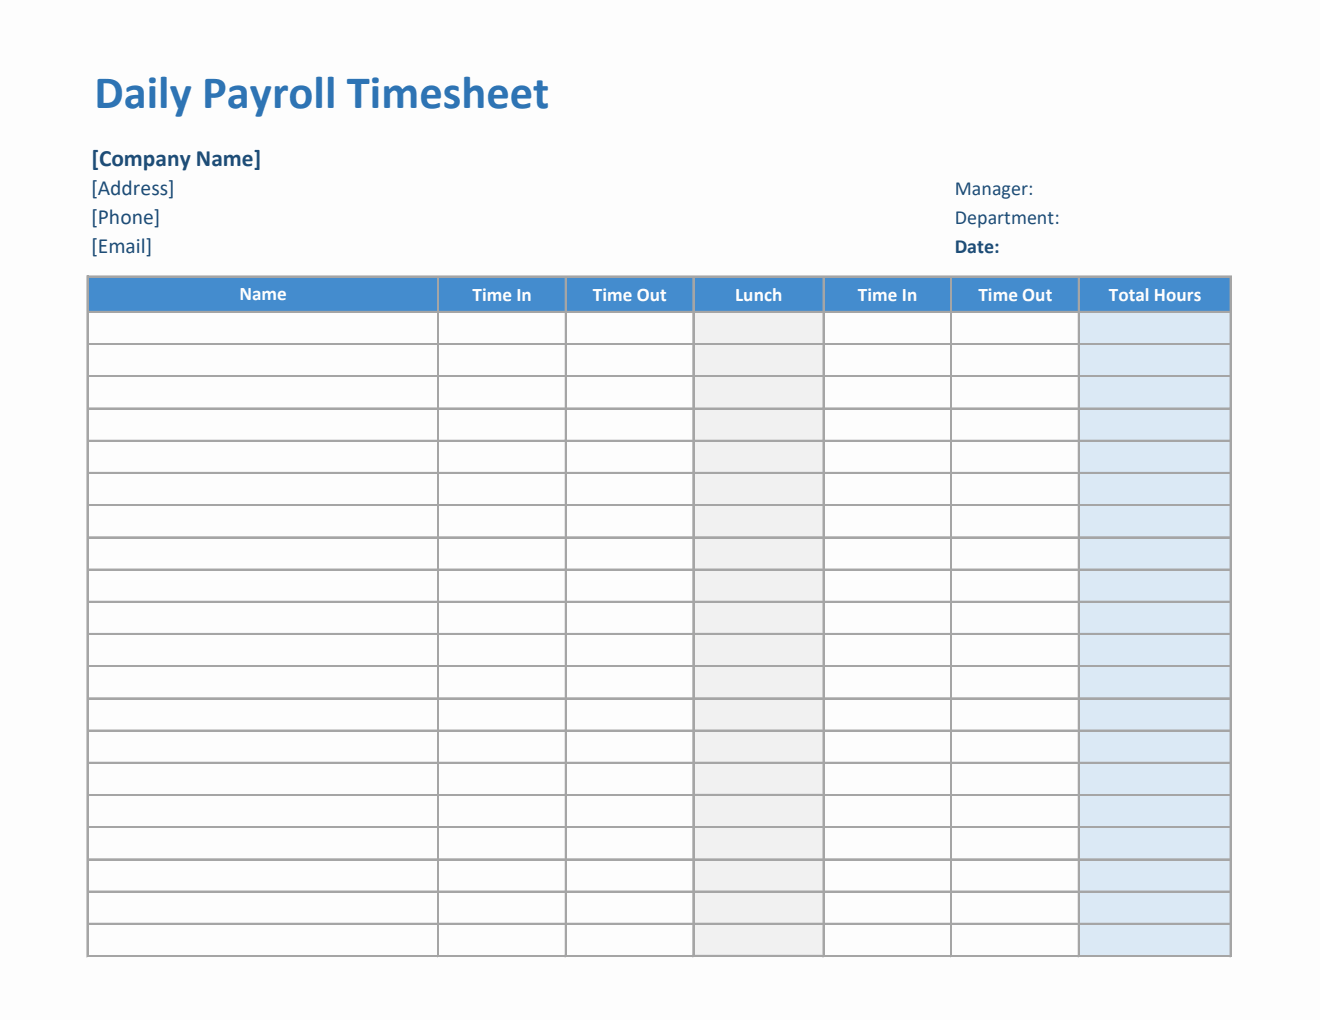 Daily Payroll Timesheet in Excel